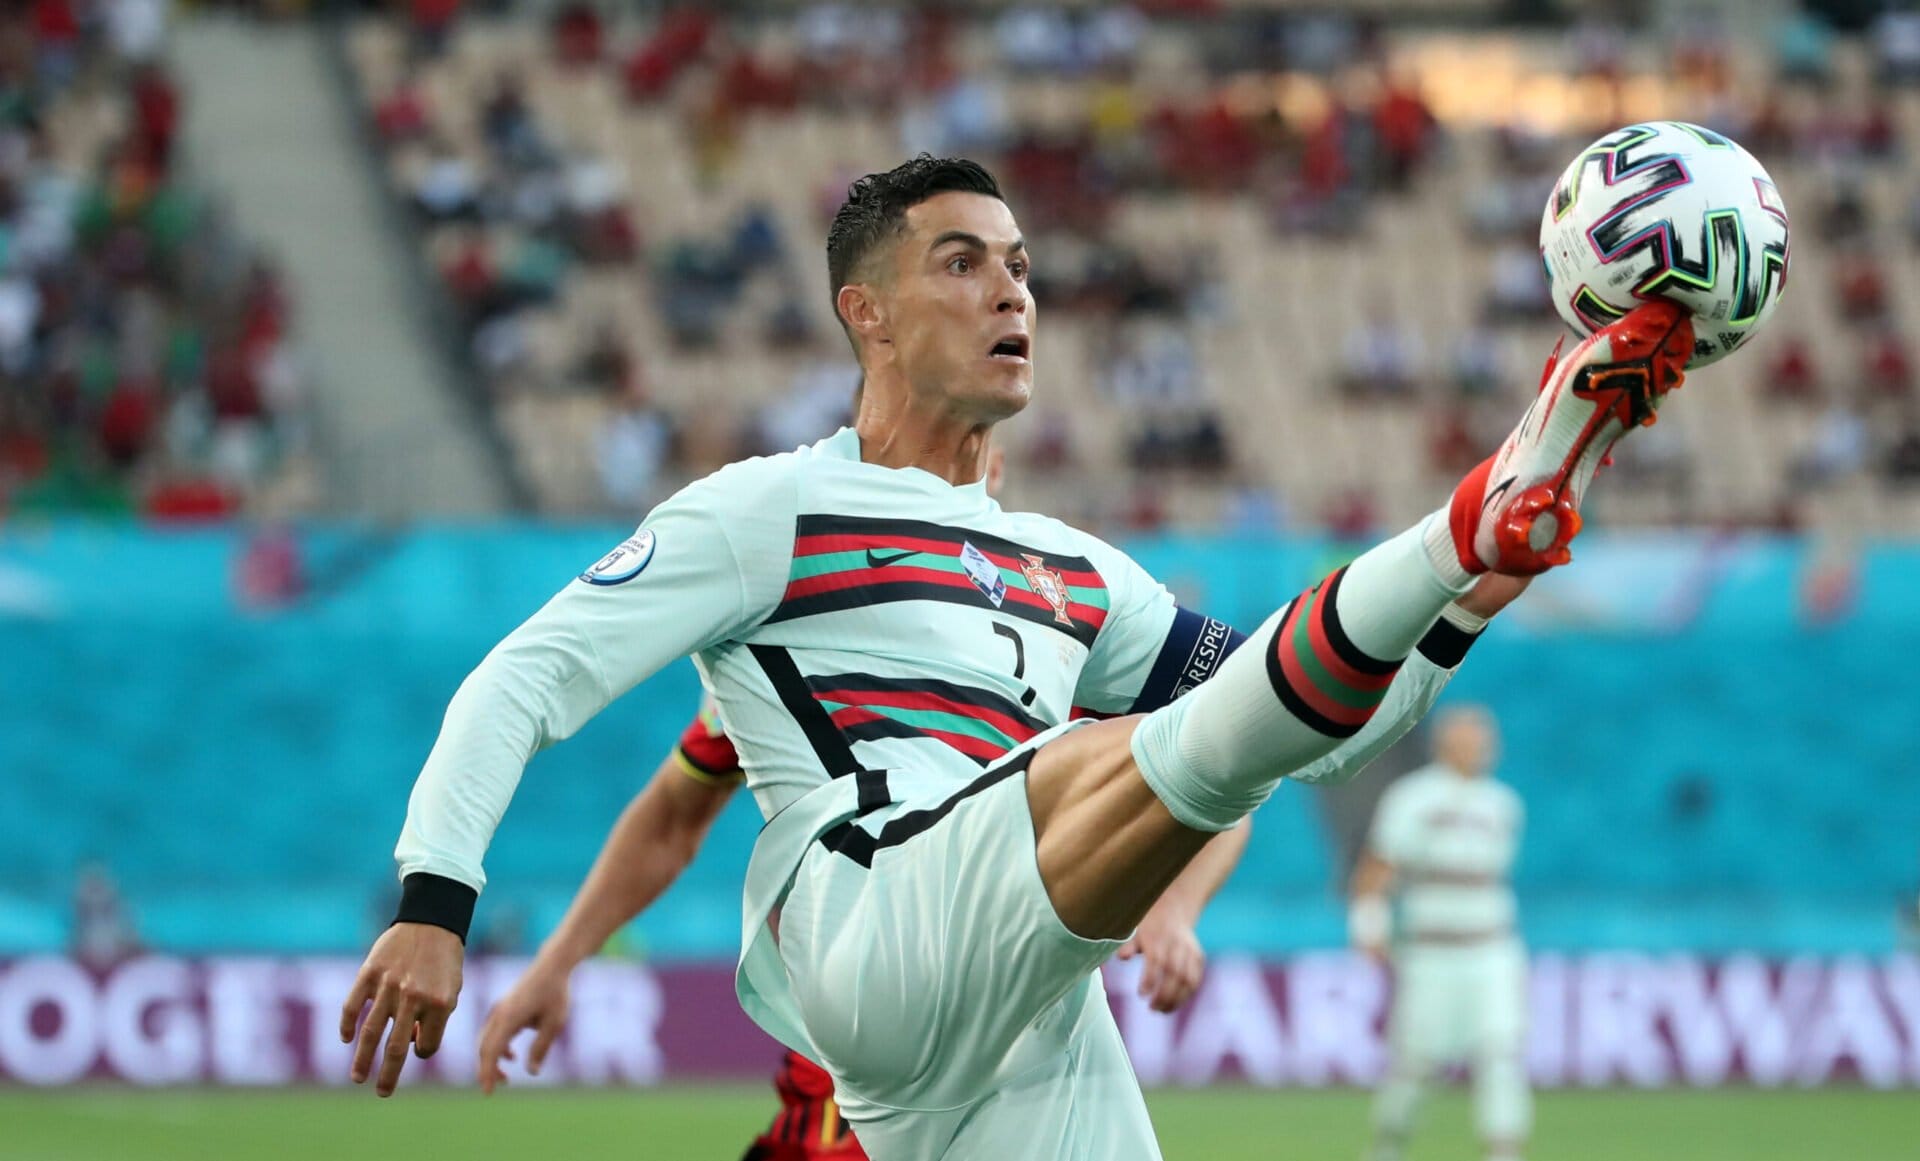 SEVILLE, SPAIN - JUNE 27: Cristiano Ronaldo of Portugal in action with the ball during the UEFA Euro 2020 Championship Round of 16 match between Belgium and Portugal at Estadio La Cartuja on June 27, 2021 in Seville, Spain.